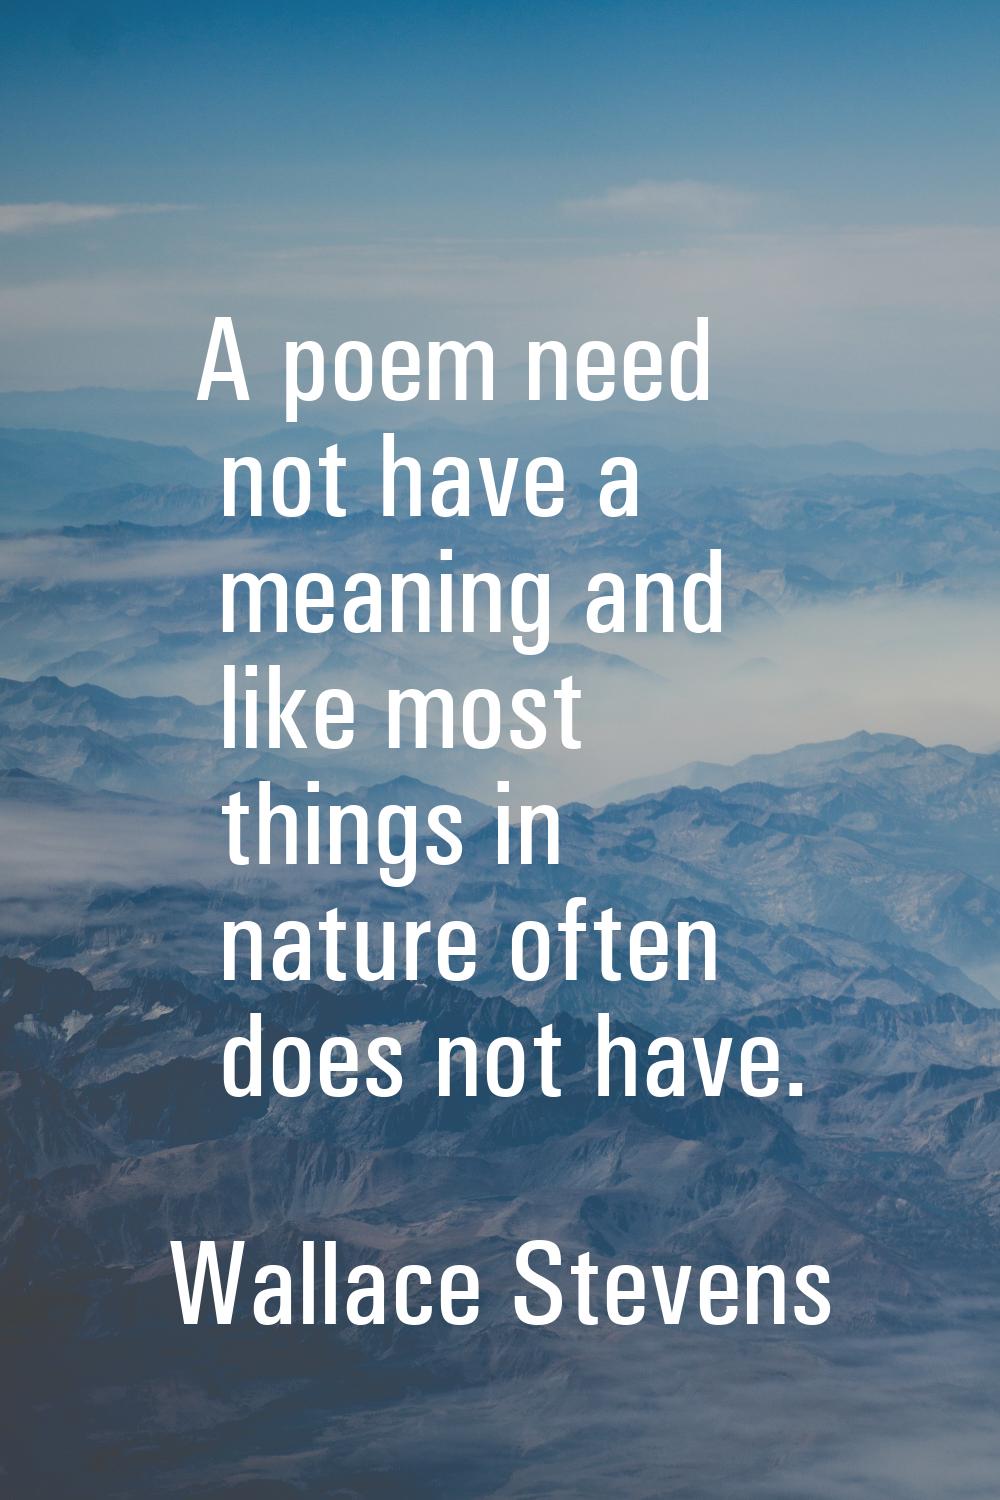 A poem need not have a meaning and like most things in nature often does not have.